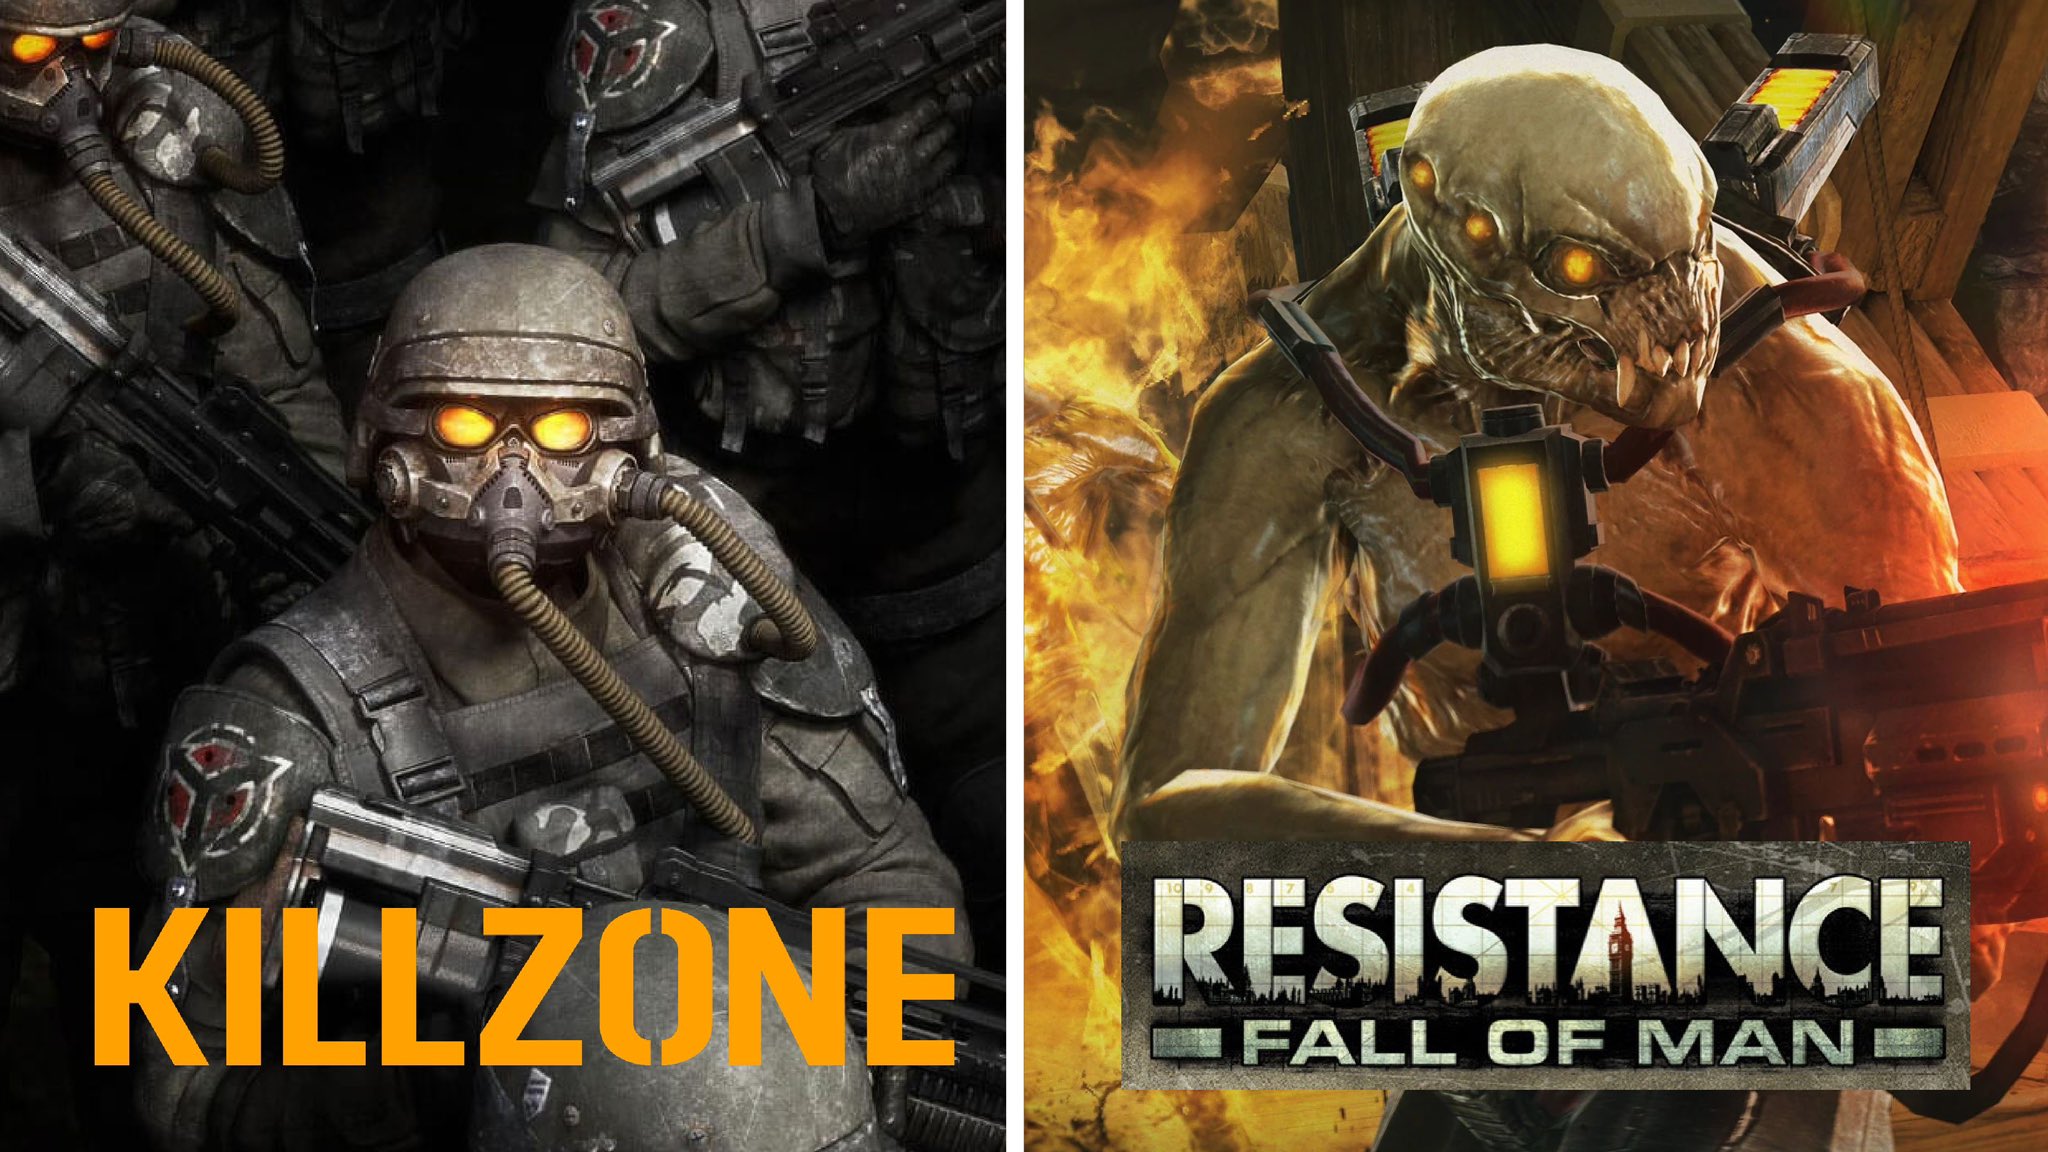 TCMFGames on X: Killzone Trilogy Remastered coming to PS5 later